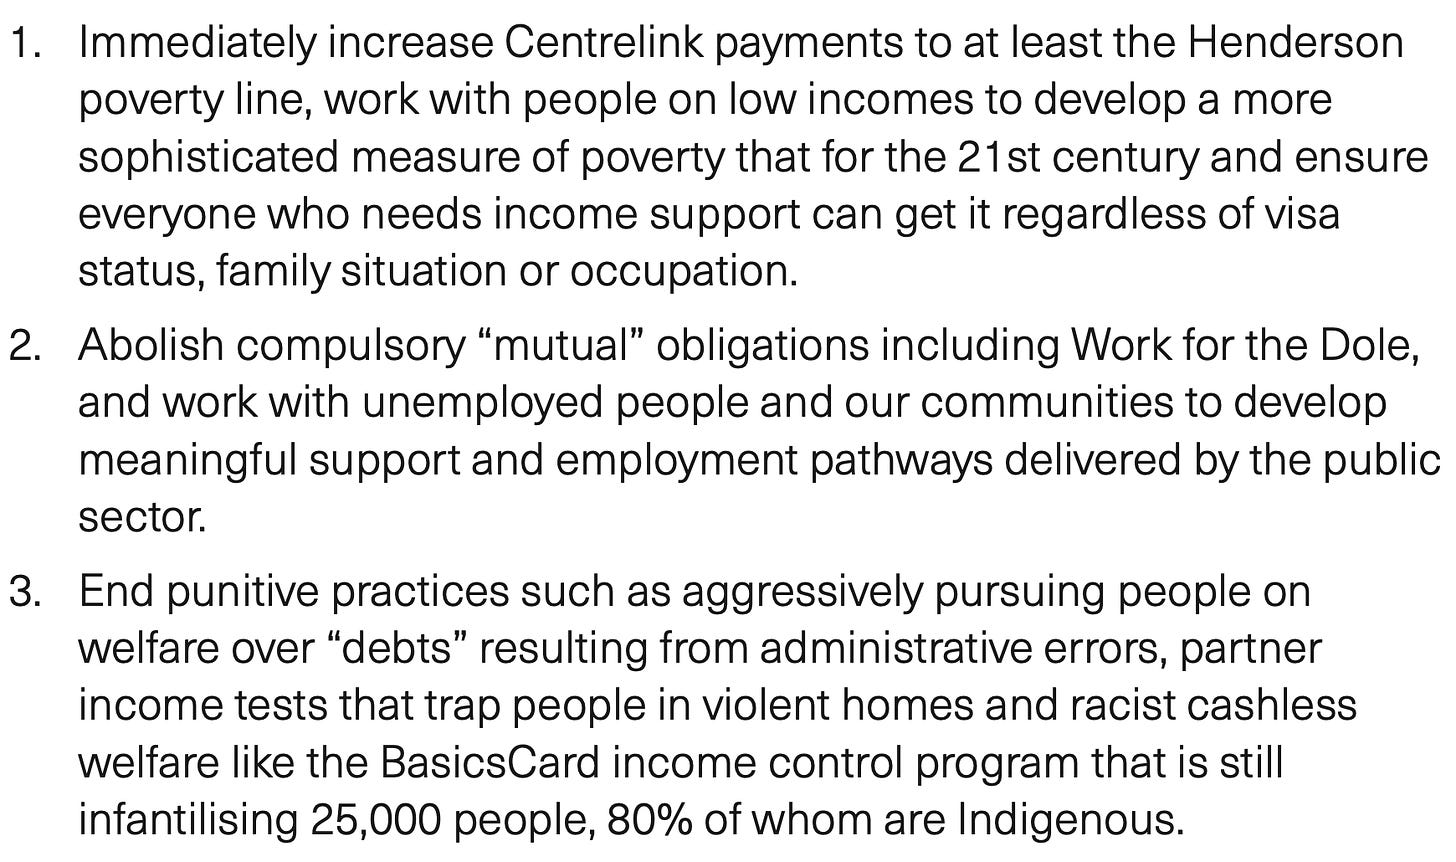 1. Immediately increase Centrelink payments to at least the Henderson poverty line, work with people on low incomes to develop a more sophisticated measure of poverty that for the 21st century and ensure everyone who needs income support can get it regardless of visa status, family situation or occupation. 2. Abolish compulsory “mutual” obligations including Work for the Dole, and work with unemployed people and our communities to develop meaningful support and employment pathways delivered by the public sector. 3. End punitive practices such as aggressively pursuing people on welfare over “debts” resulting from administrative errors, partner income tests that trap people in violent homes and racist cashless welfare like the BasicsCard income control program that is still infantilising 25,000 people, 80% of whom are Indigenous.